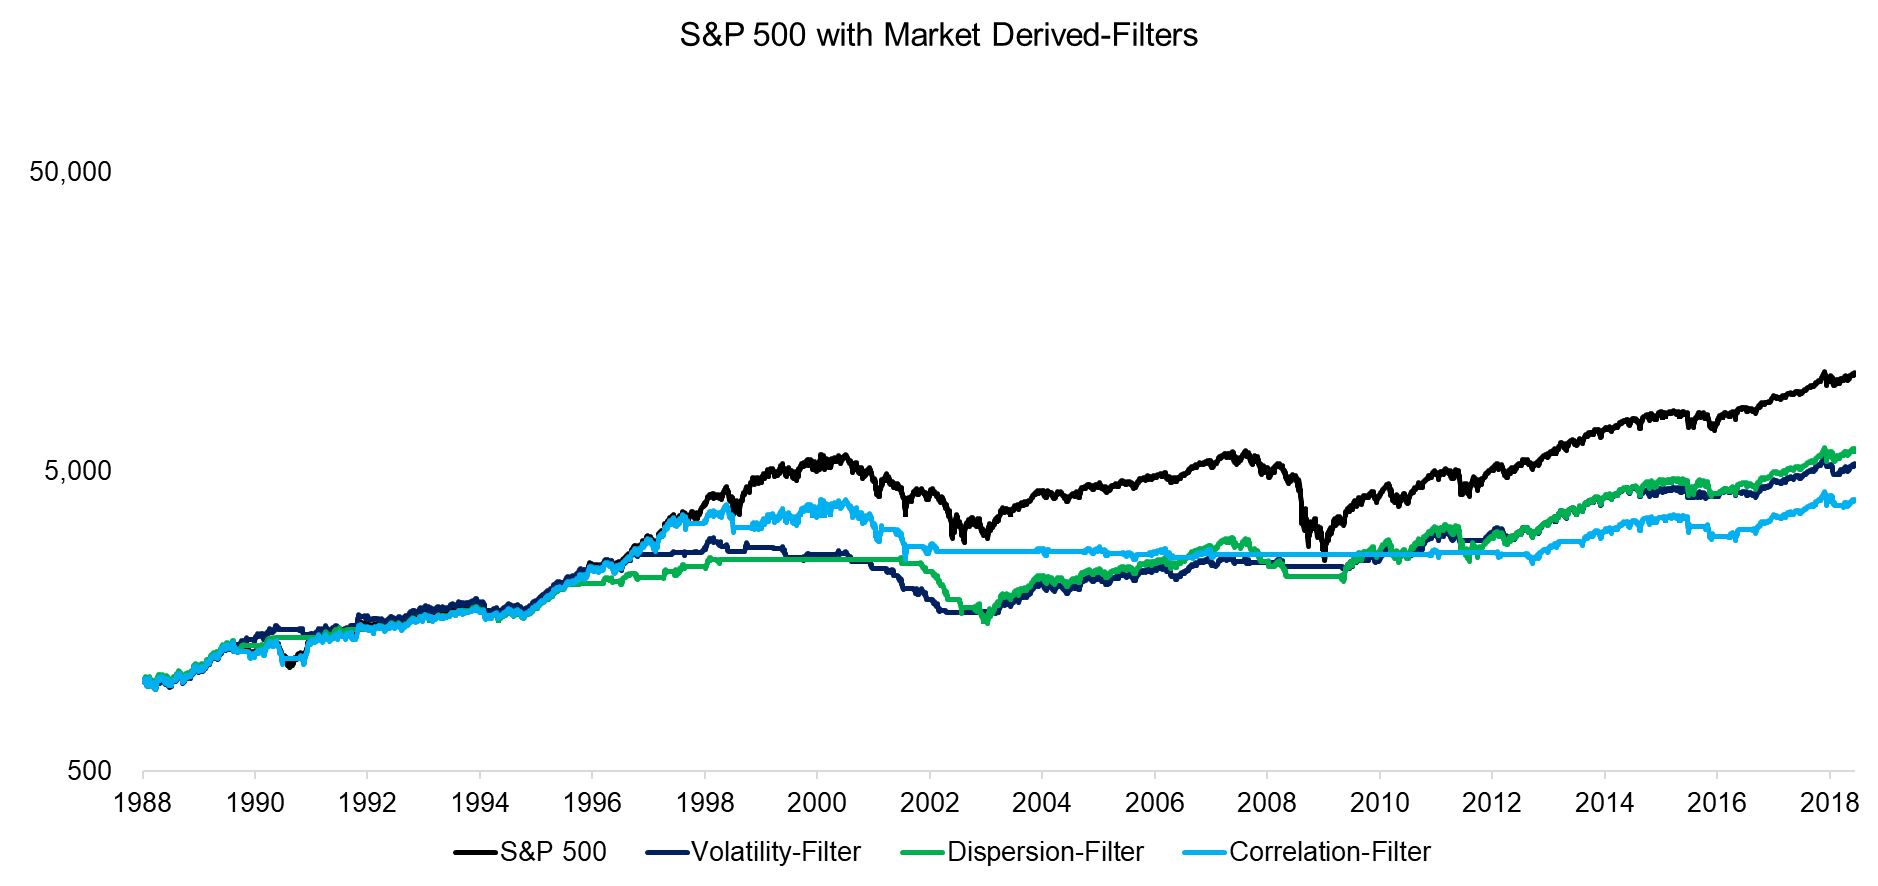 S&P 500 with Market Derived-Filters